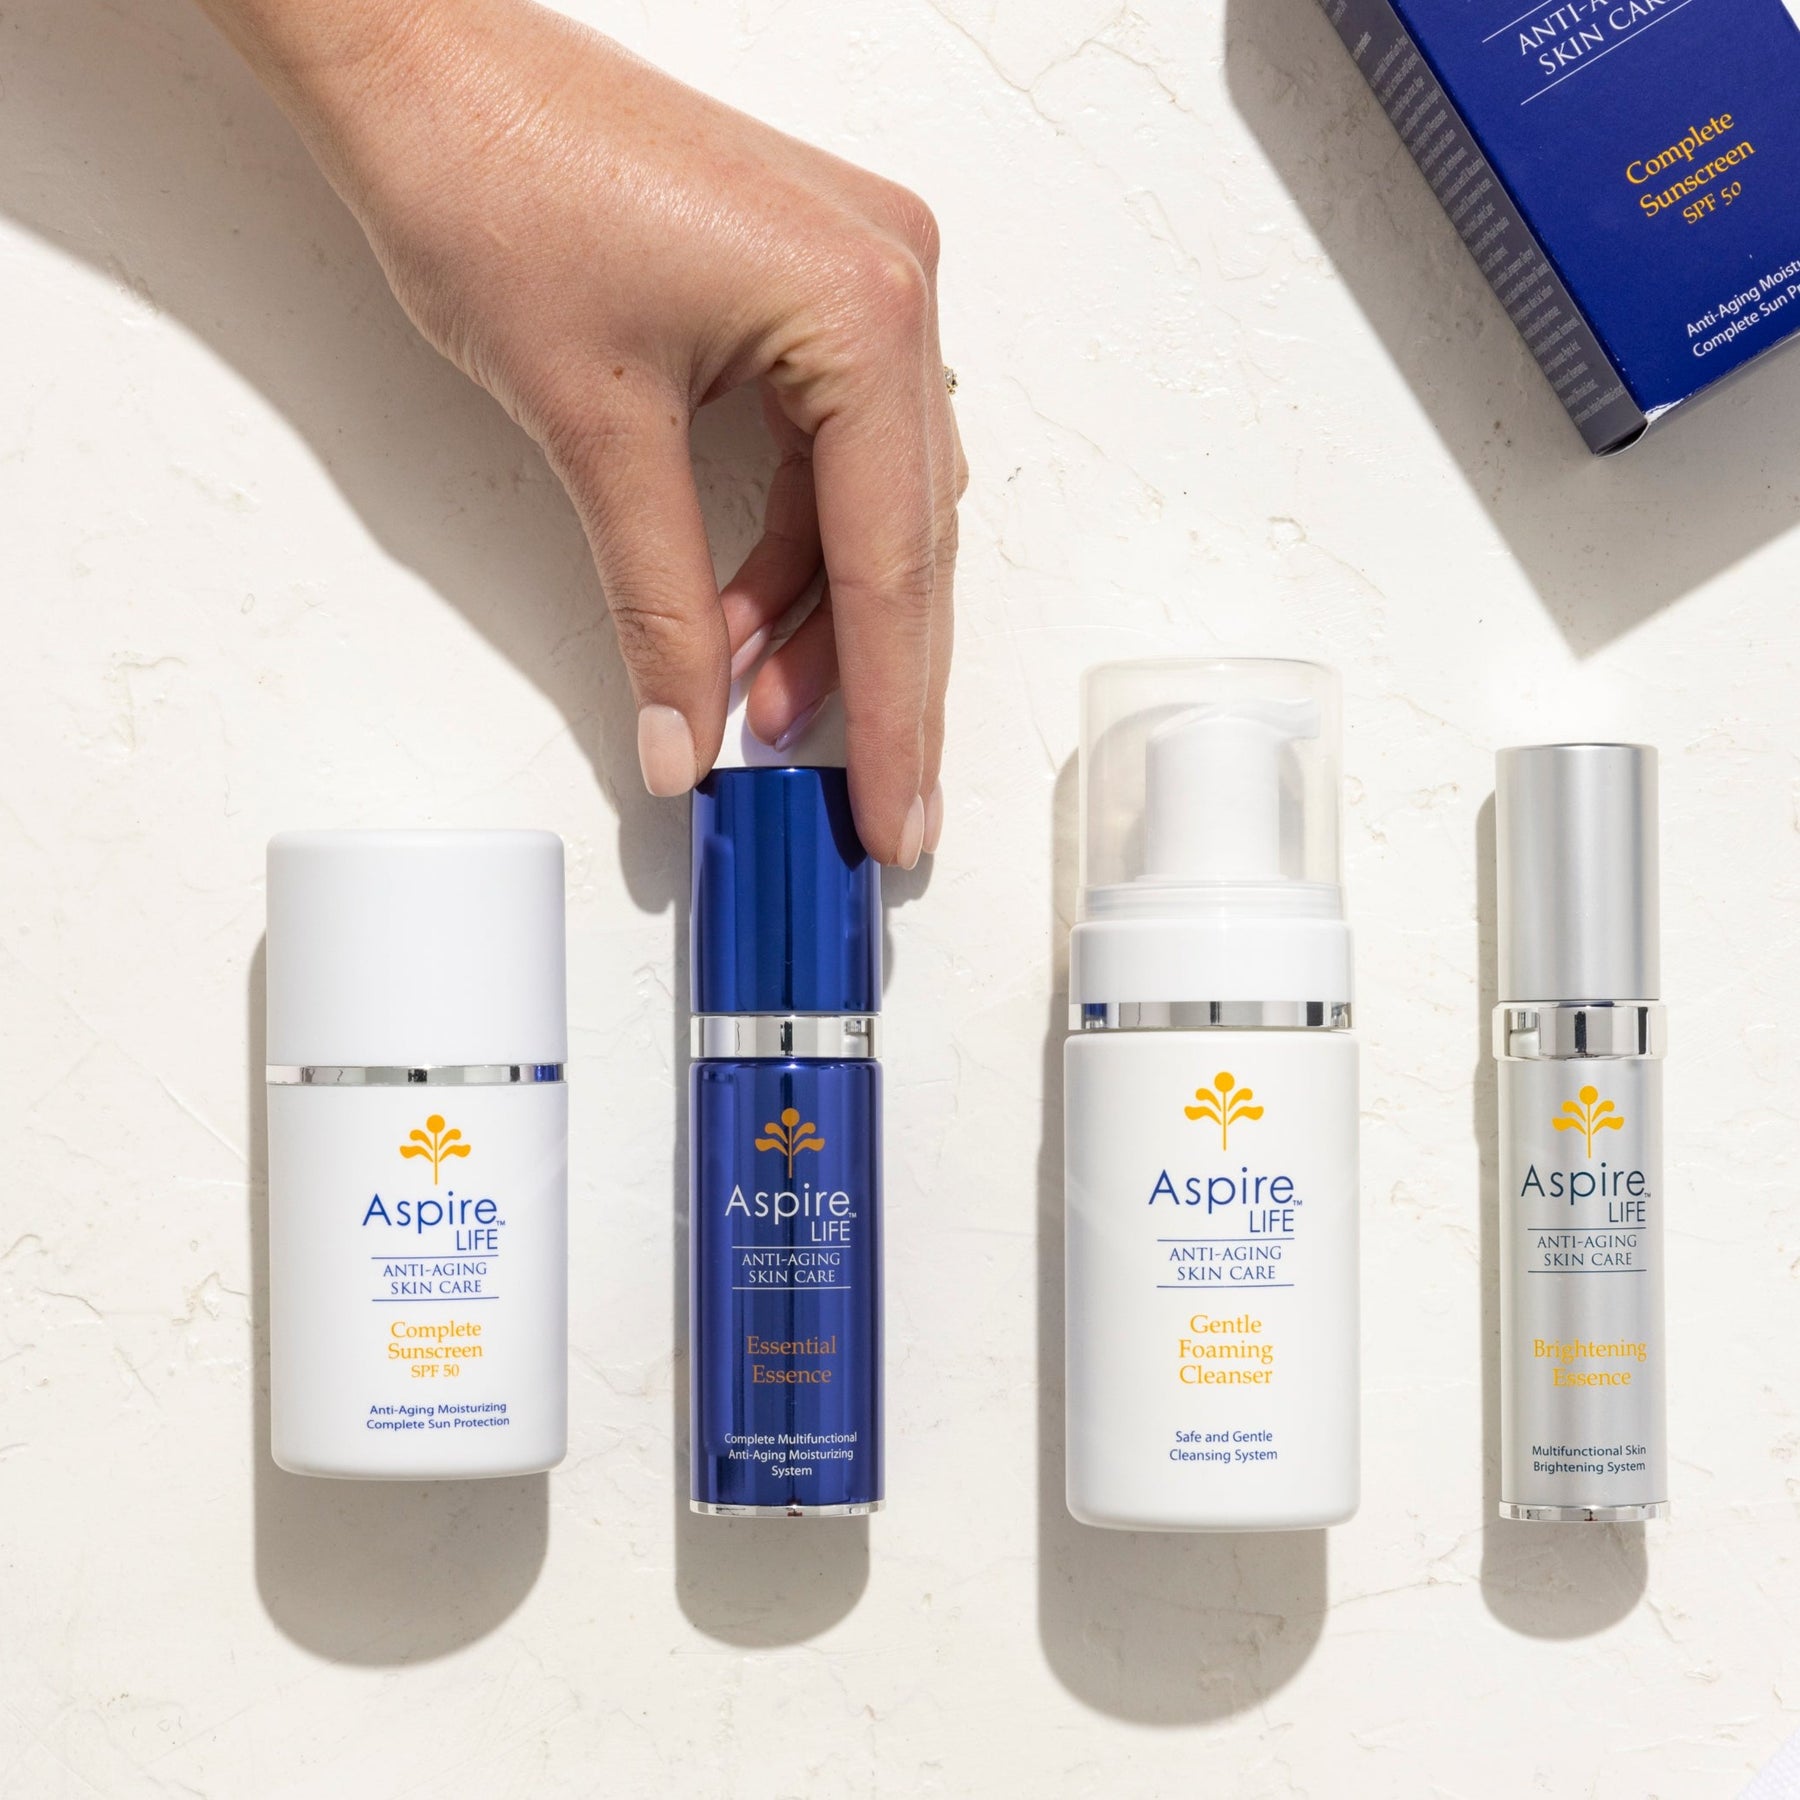 The Complete Set – AspireLIFE Anti-Aging Skin Care